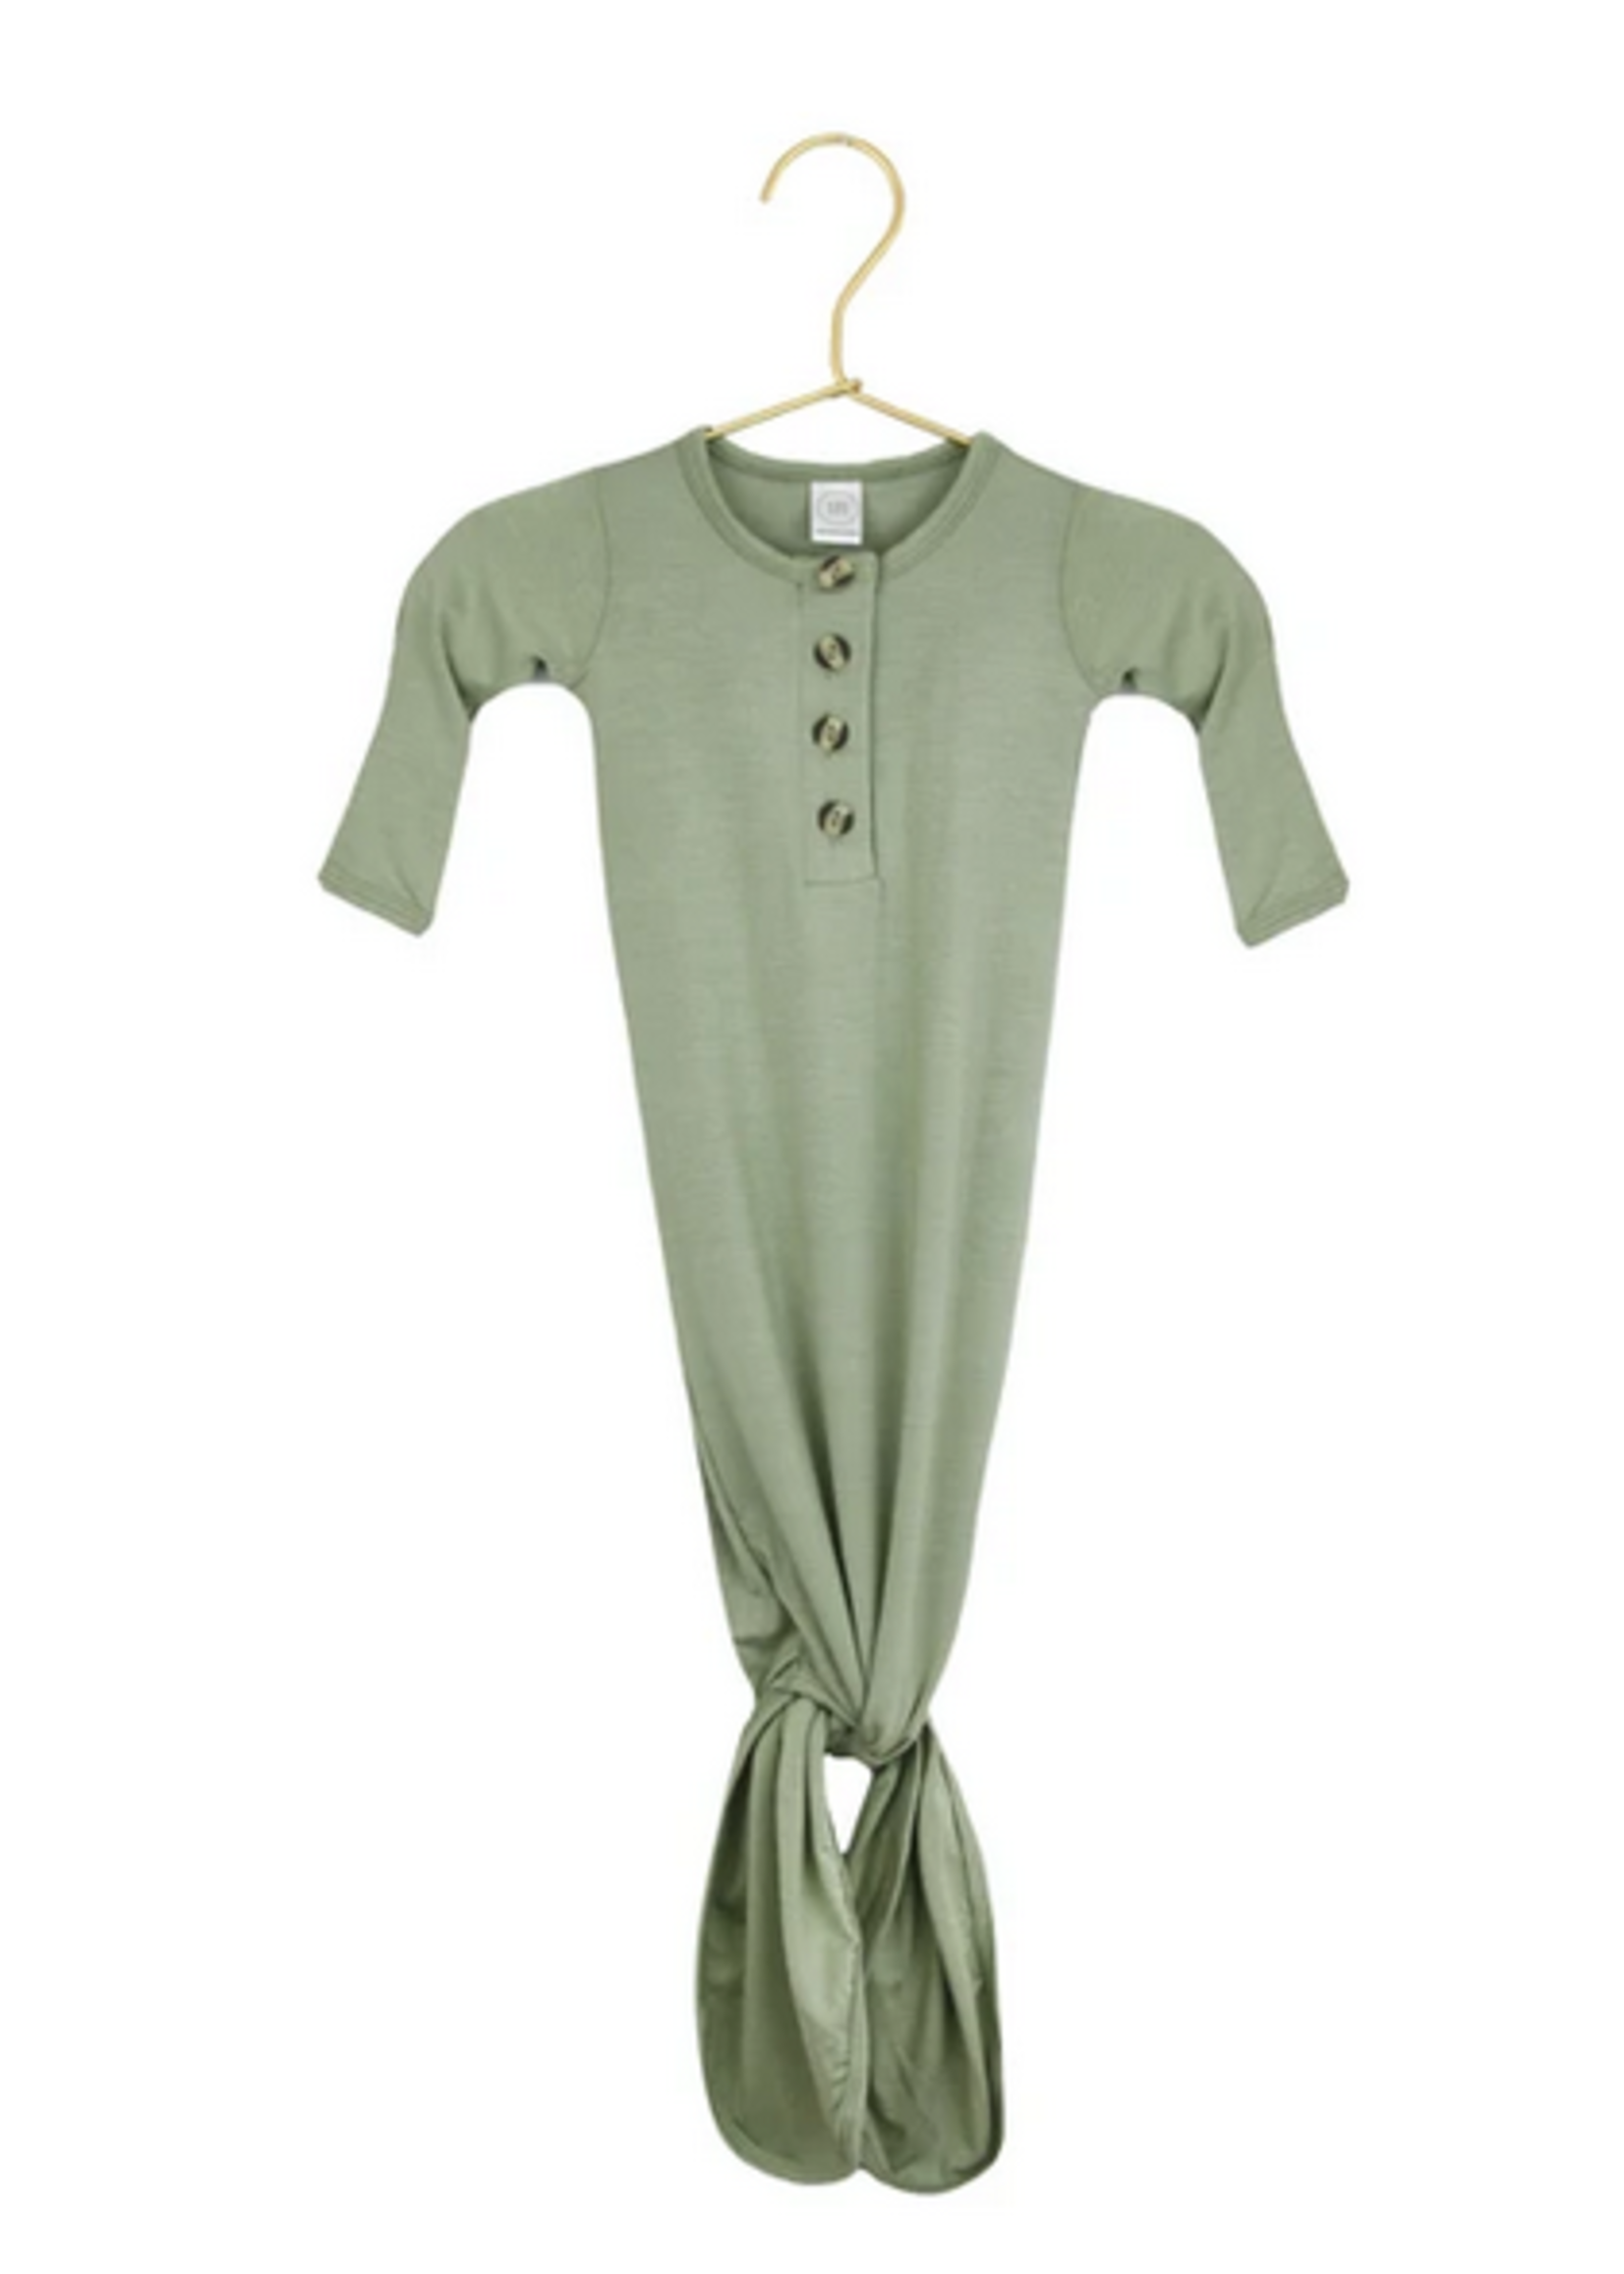 Elitaire Petite Marley Sage Knotted Gown Newborn - 3 Months